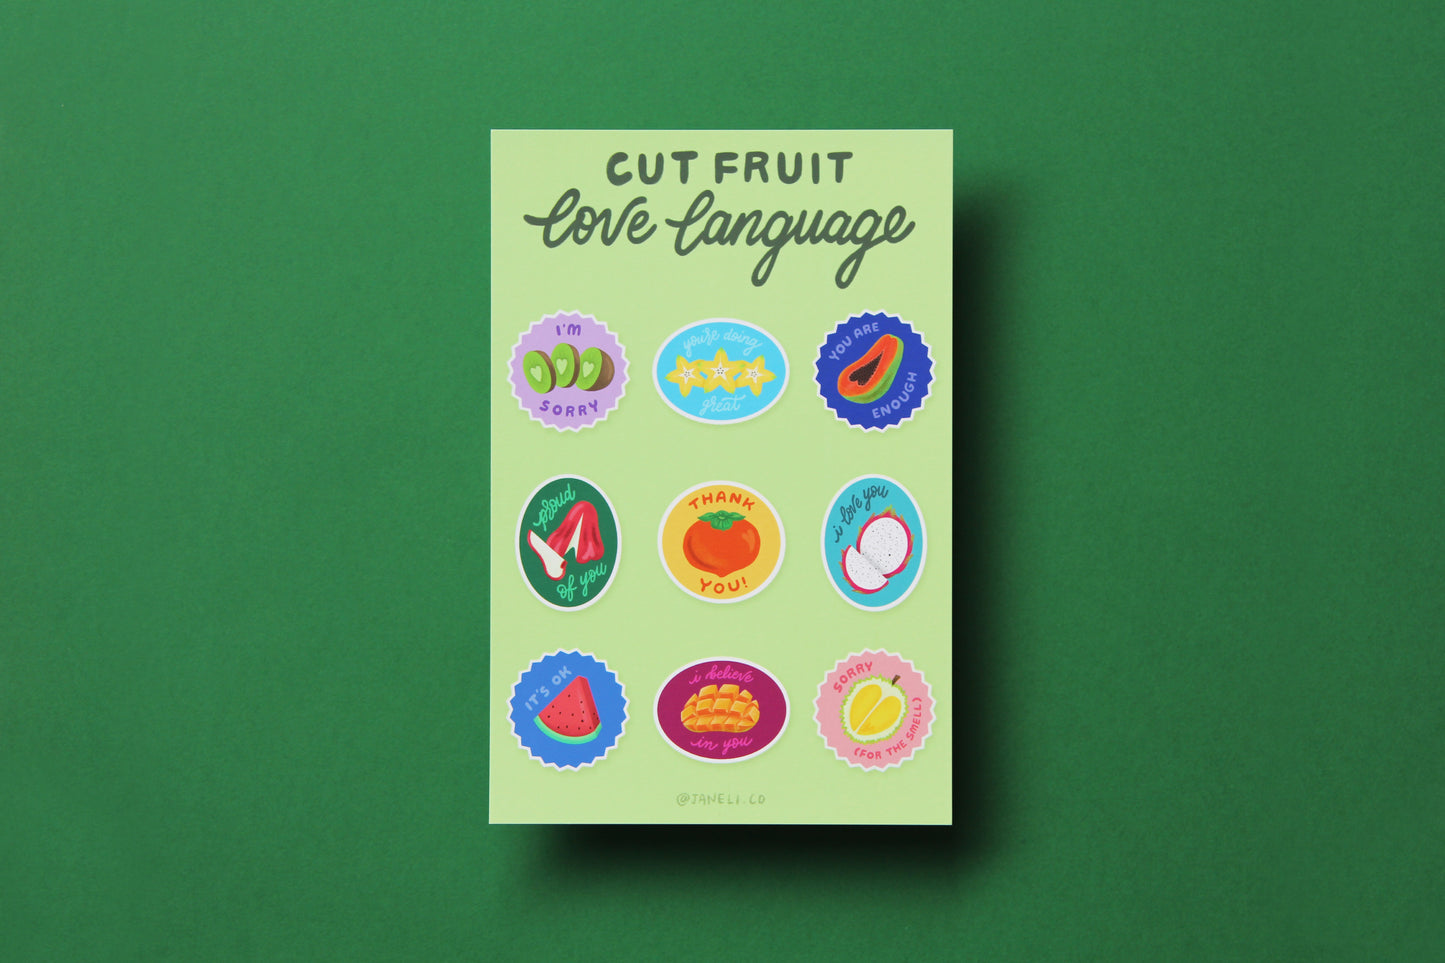 A JaneLi.Co mini print/postcard that says "Cut Fruit Love Language" with 9 different fruit stickers with different messages like "I love you", "I'm sorry", and "I'm proud of you" over a green background.